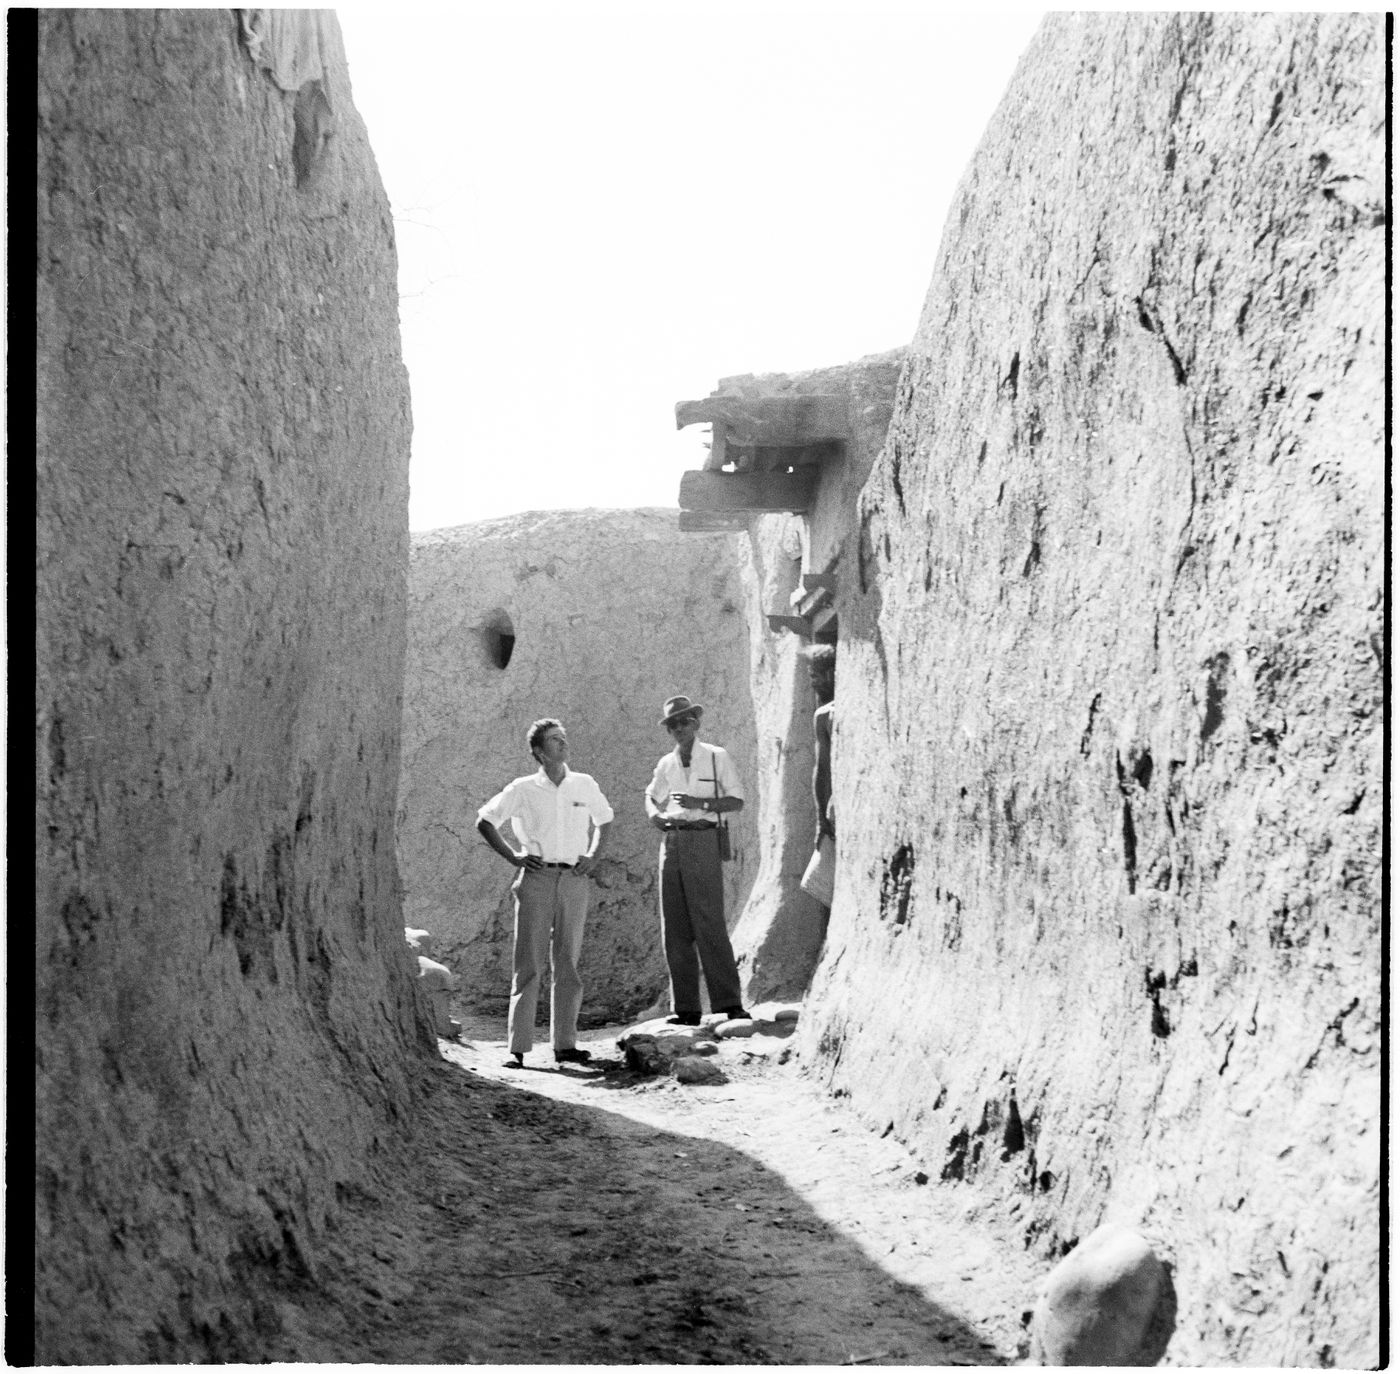 View of adobe structures in a village near Chandigarh, India, with 2 men standing in the centre and 1 man leaning in a doorway